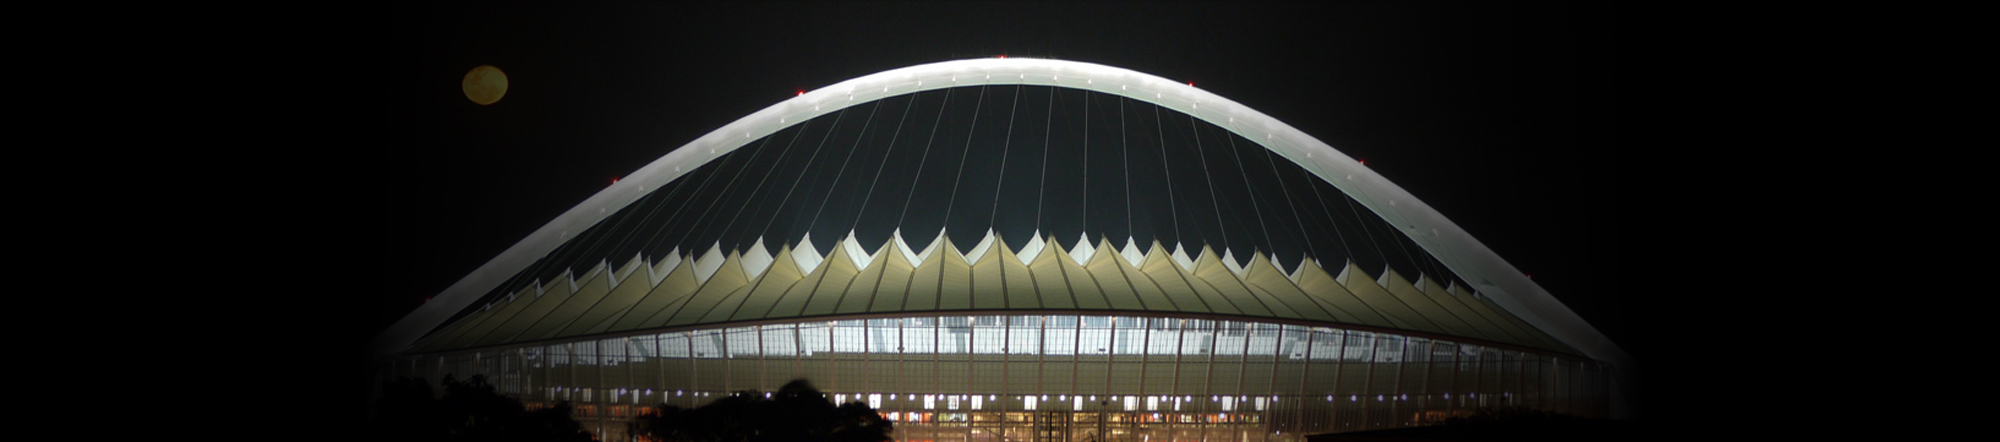 Architectural fabric atop the Moses Mabhida stadium in Durban, South Africa